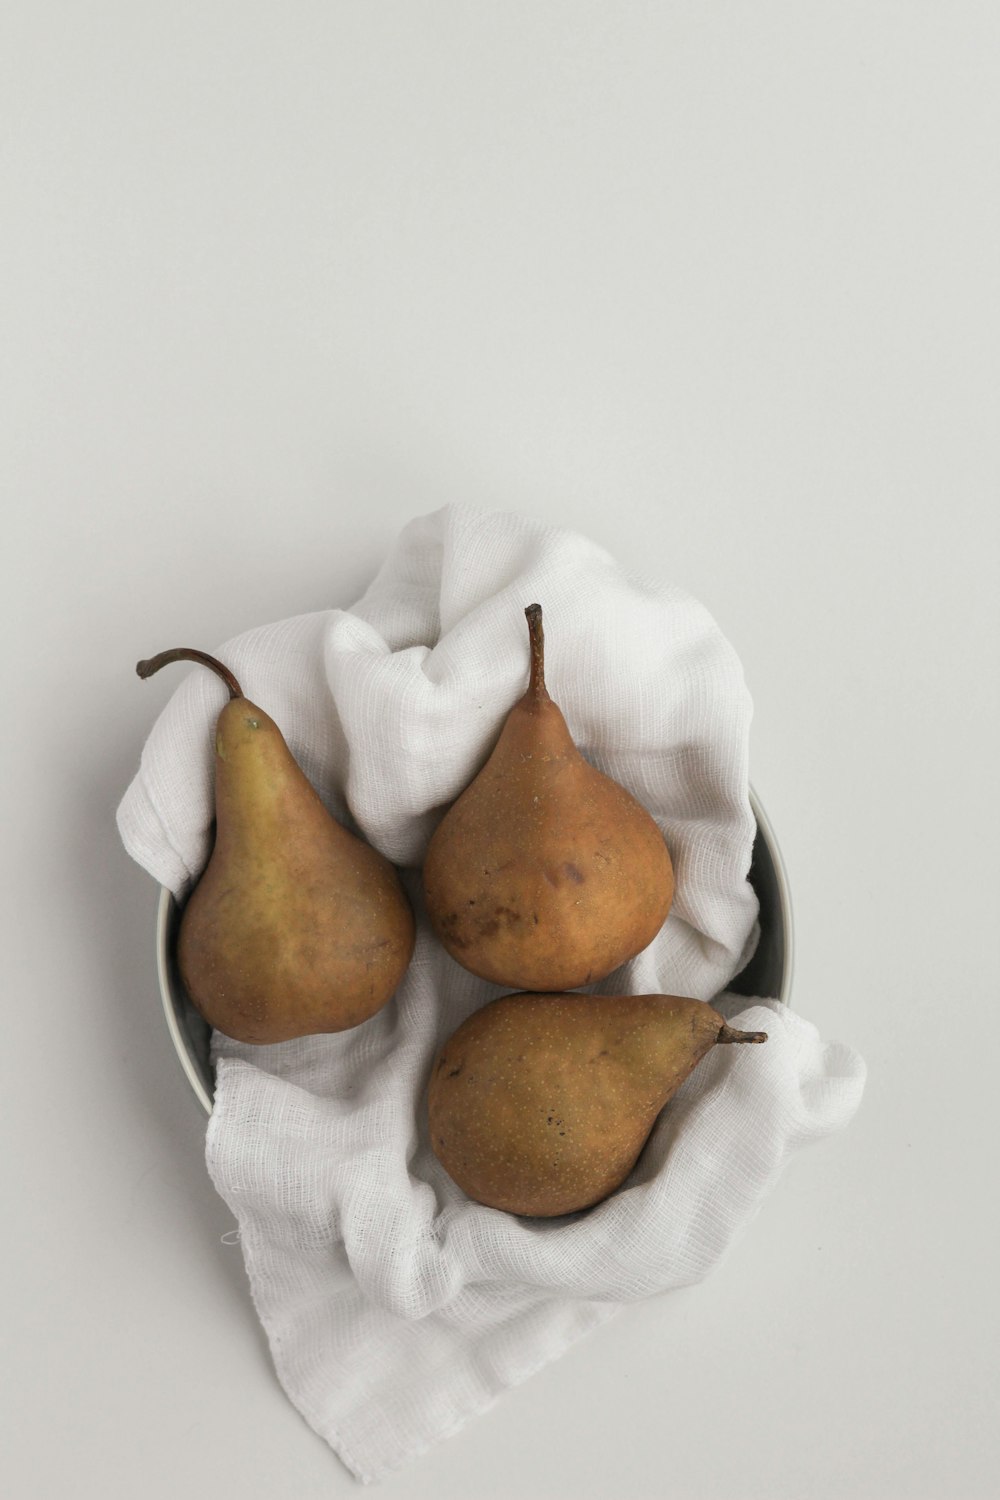 three pears in a bowl on a white cloth